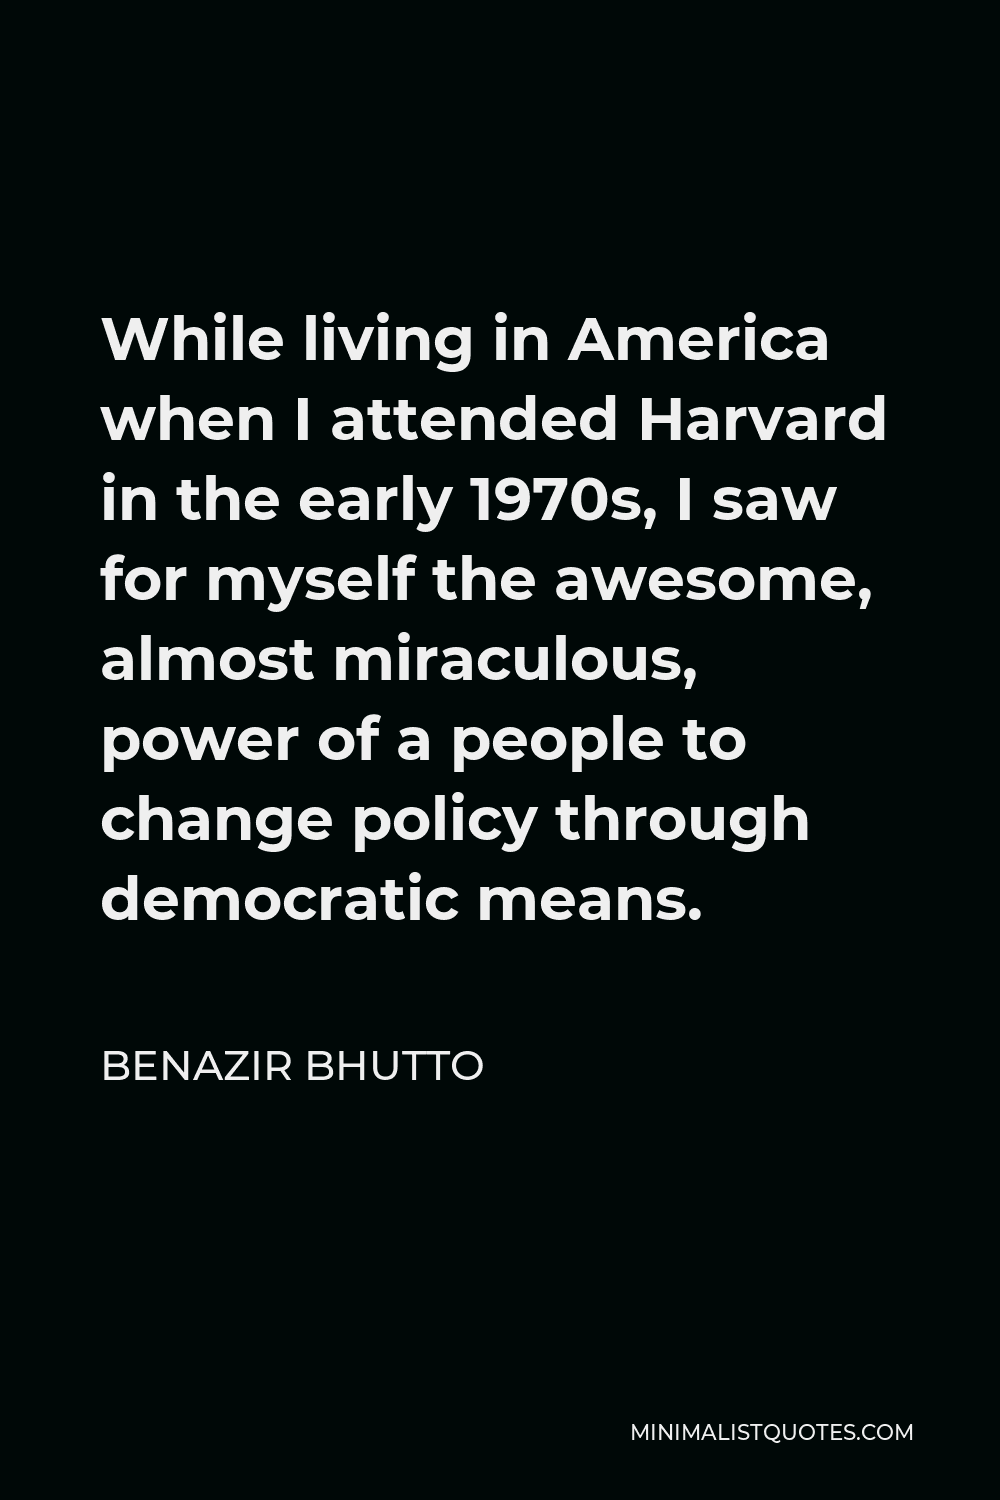 Benazir Bhutto Quote - While living in America when I attended Harvard in the early 1970s, I saw for myself the awesome, almost miraculous, power of a people to change policy through democratic means.